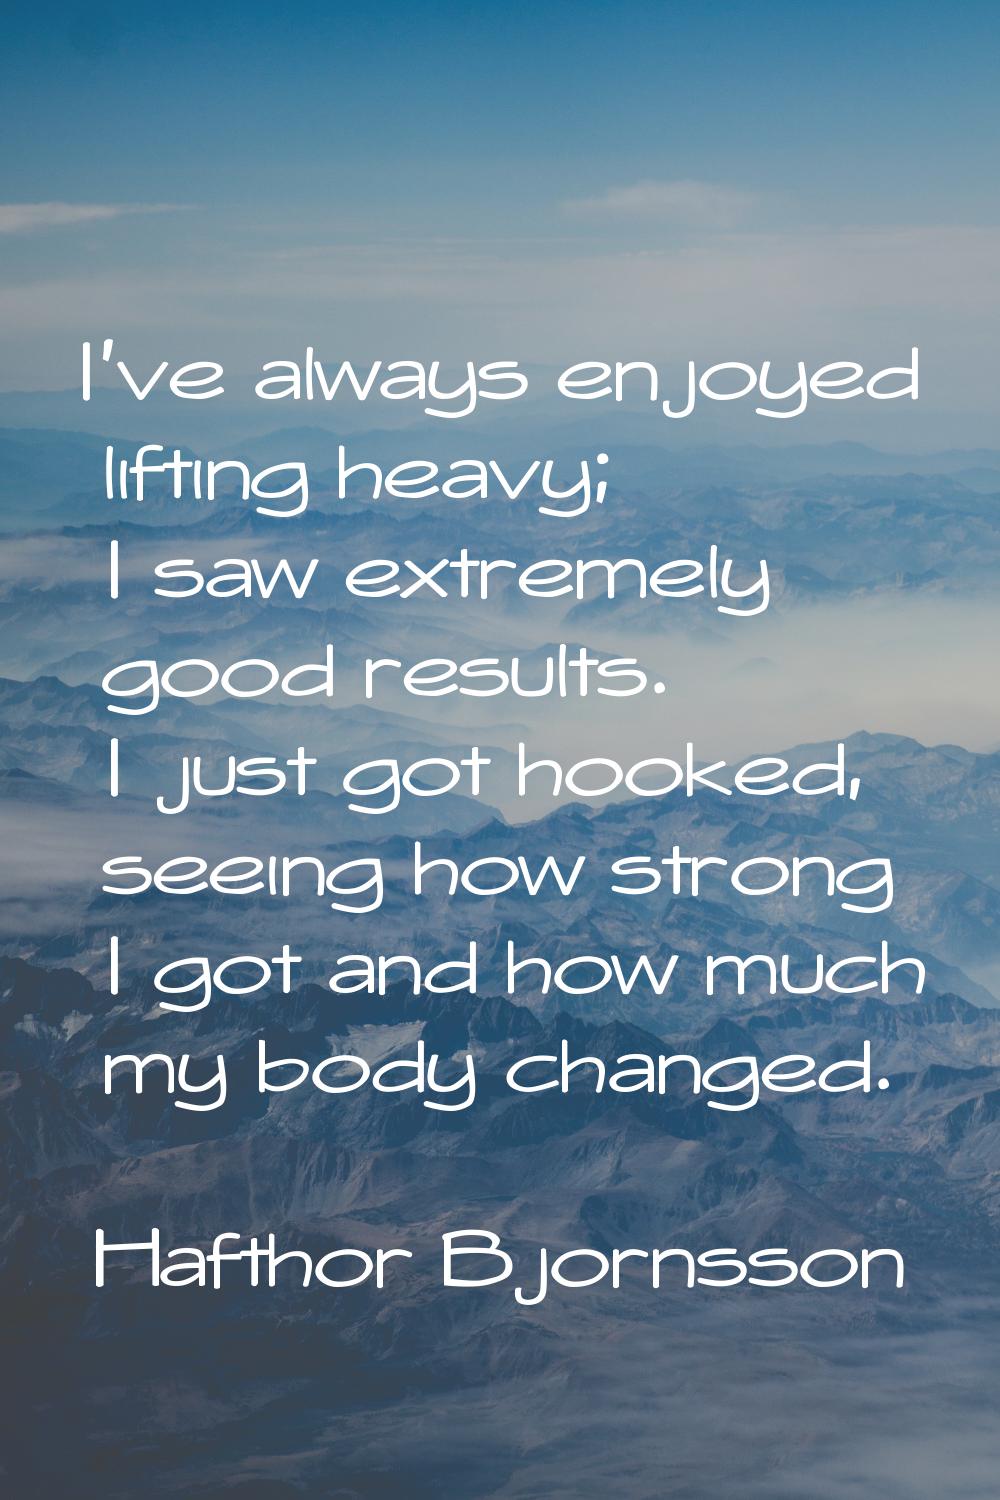 I've always enjoyed lifting heavy; I saw extremely good results. I just got hooked, seeing how stro